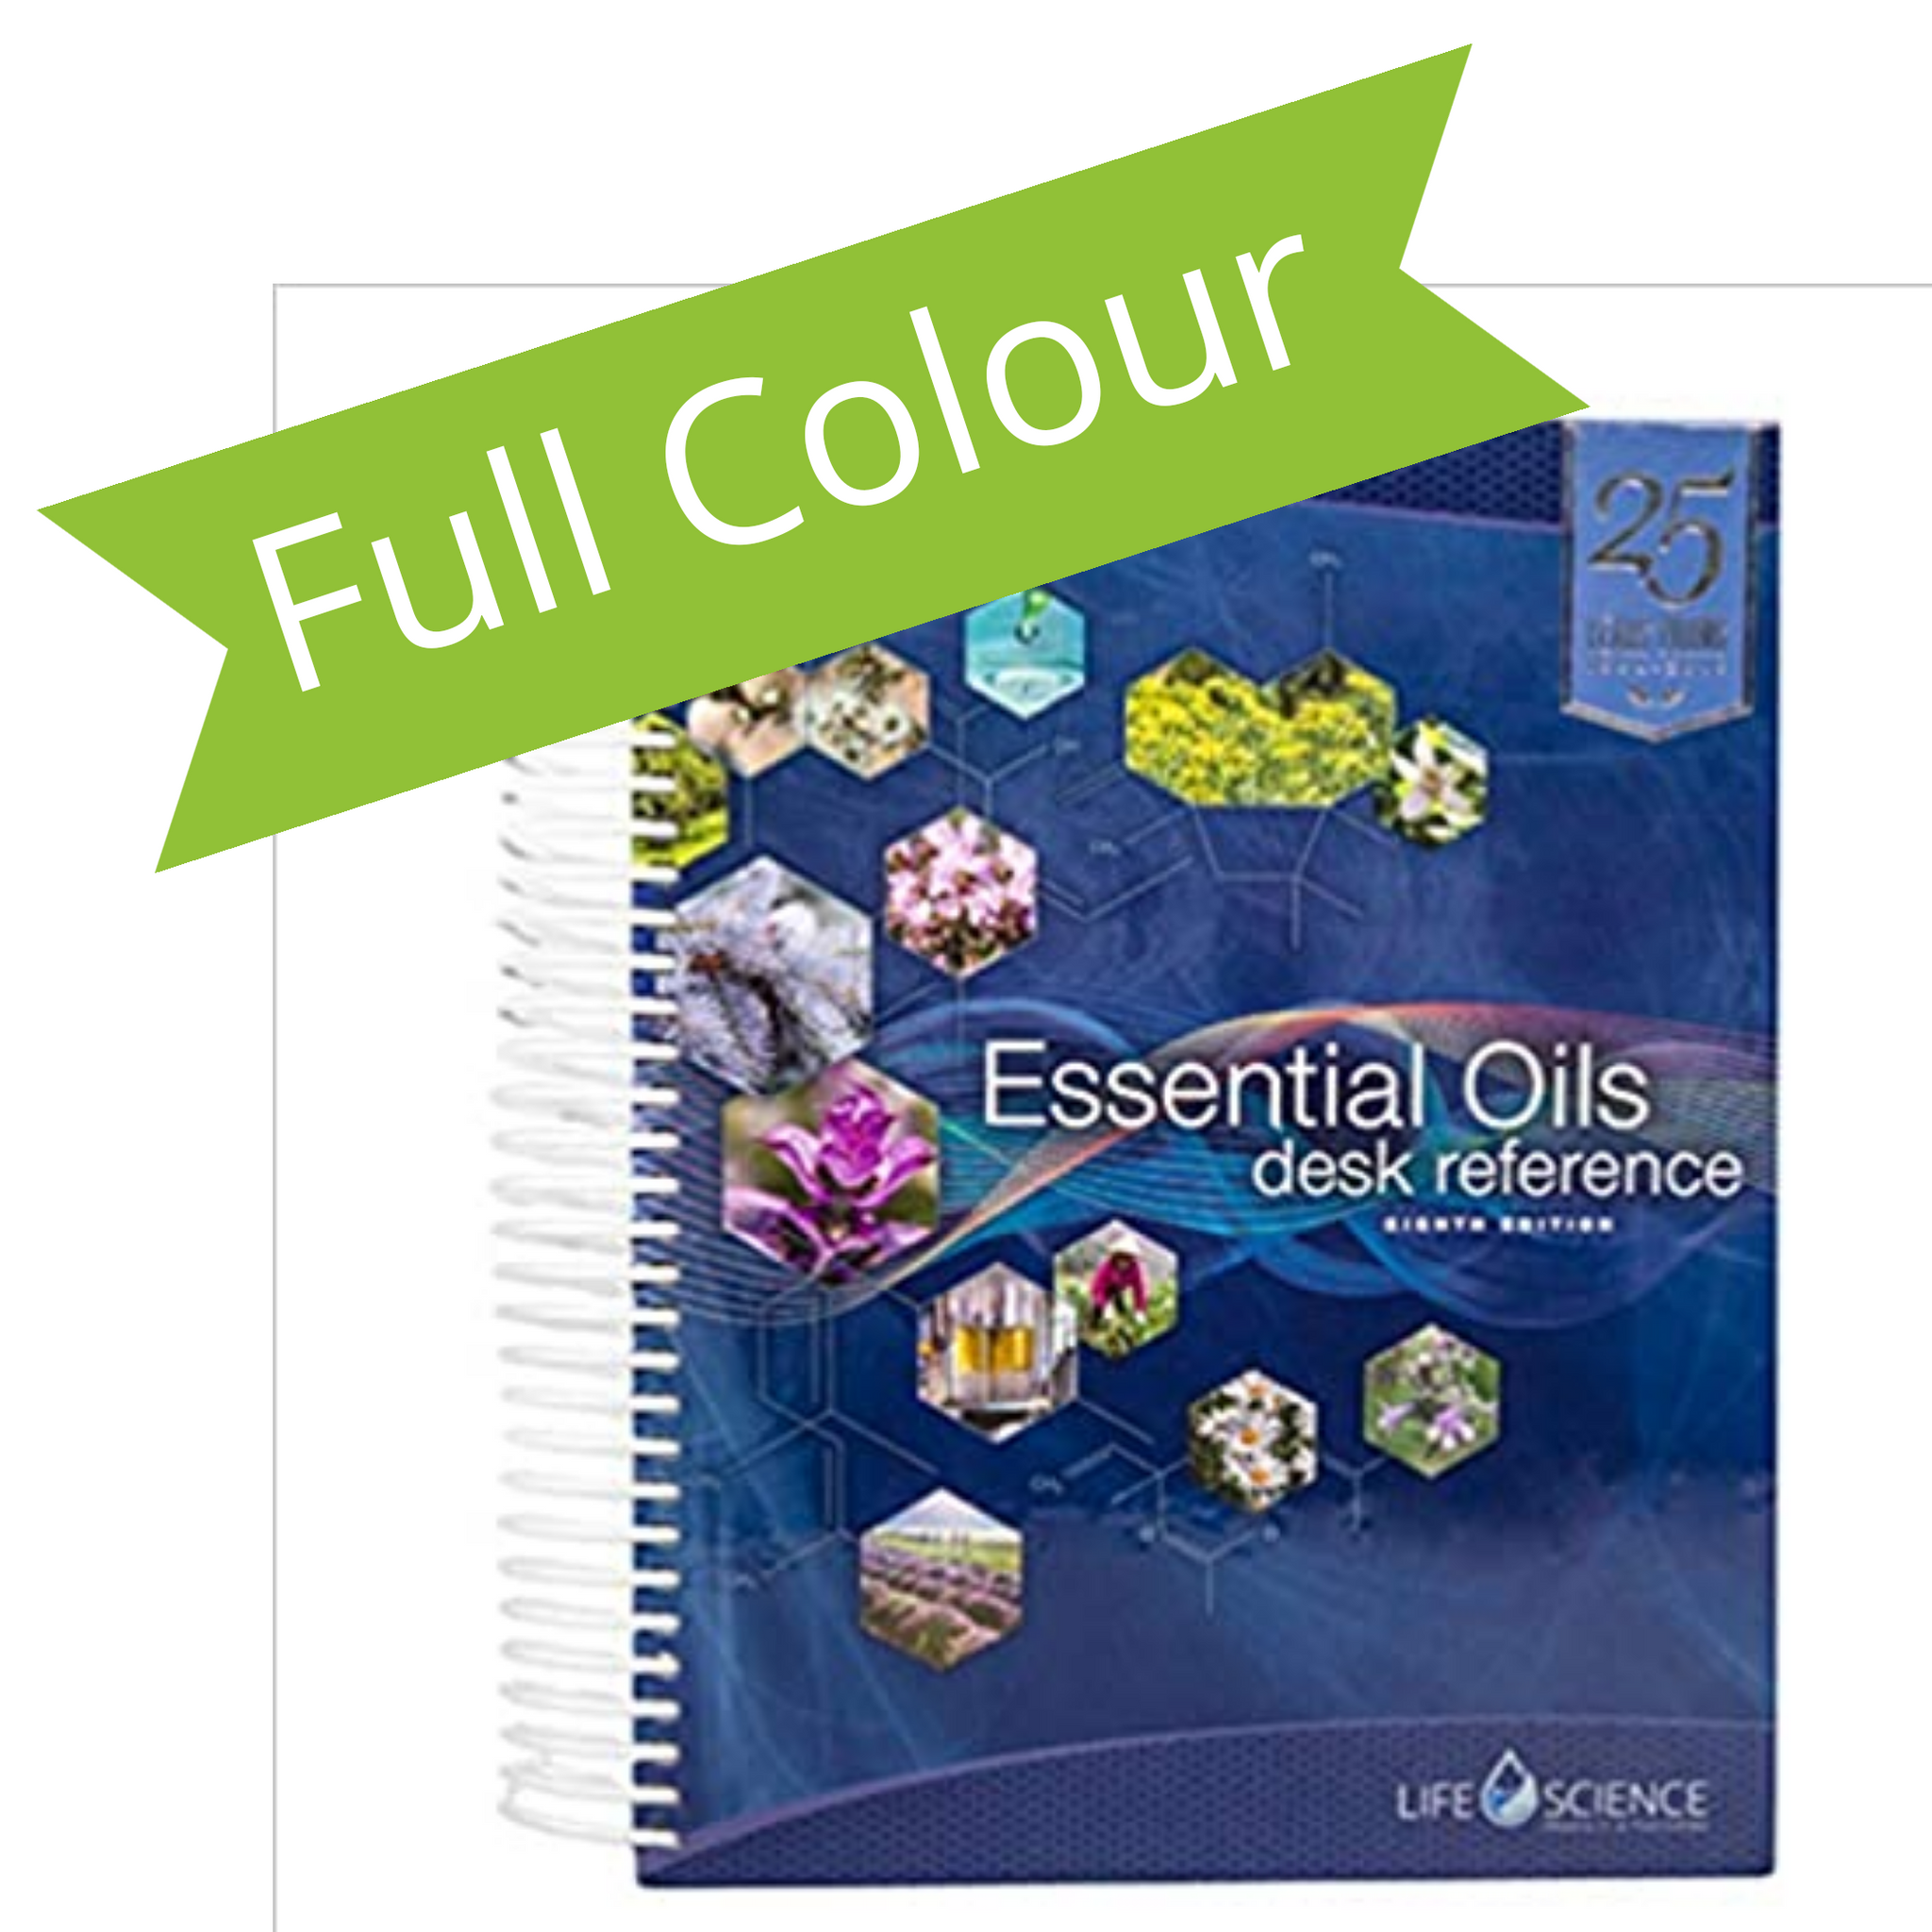 Essential Oils Desk Reference 8th Edition - FULL-COLOR (2019)